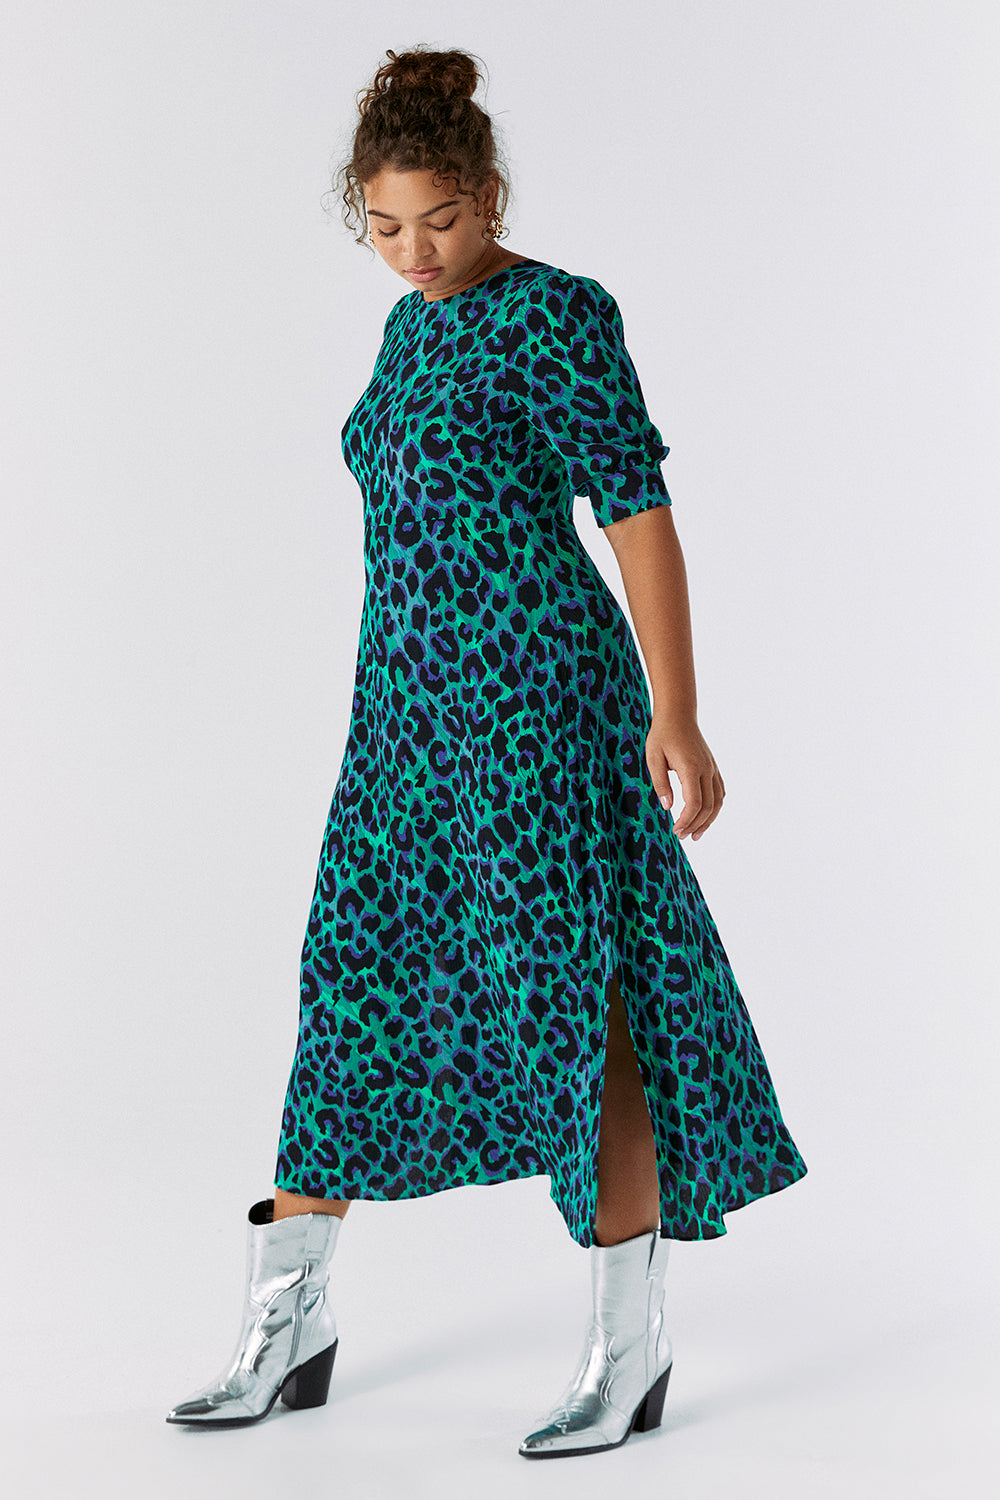 Green with Blue & Black Shadow Leopard Midi Dress Scamp & Dude